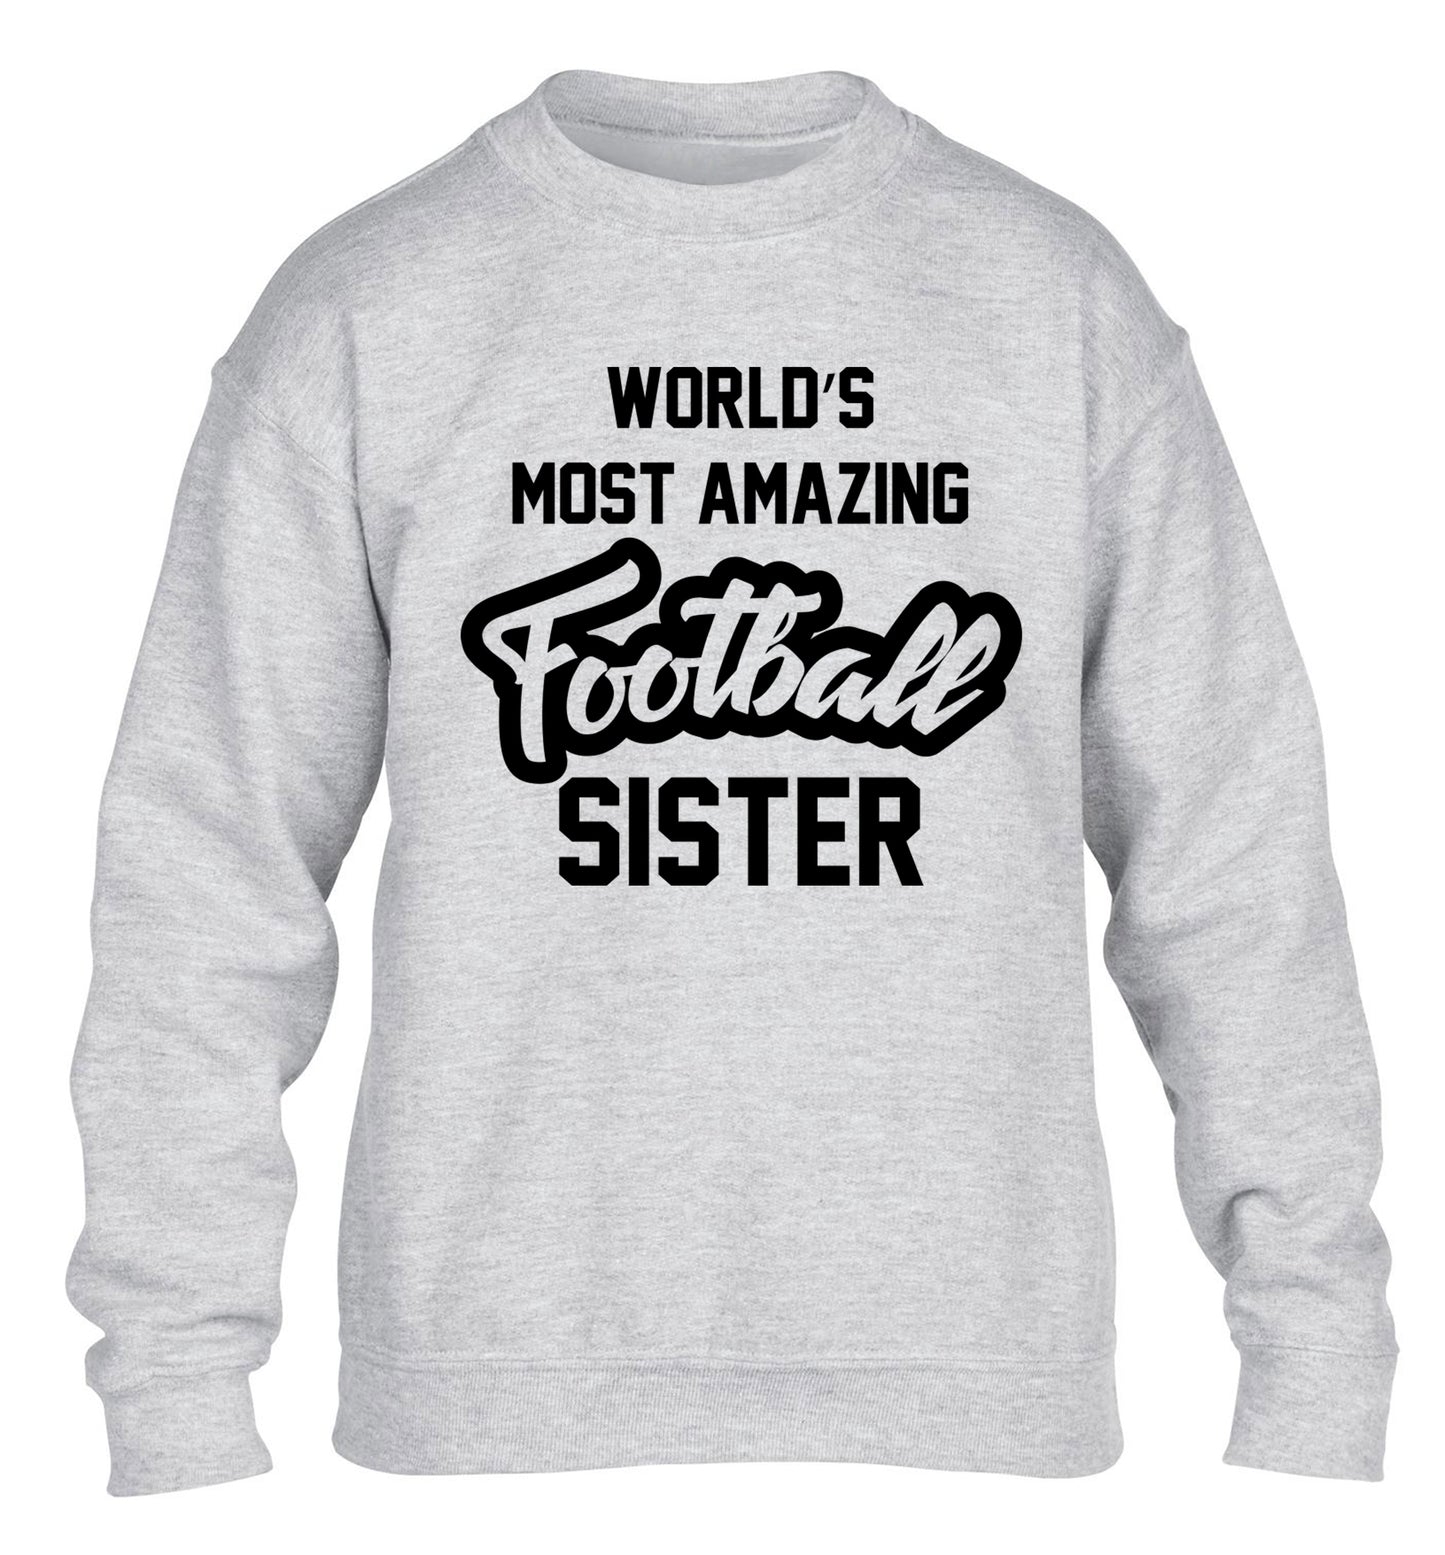 Worlds most amazing football sister children's grey sweater 12-14 Years